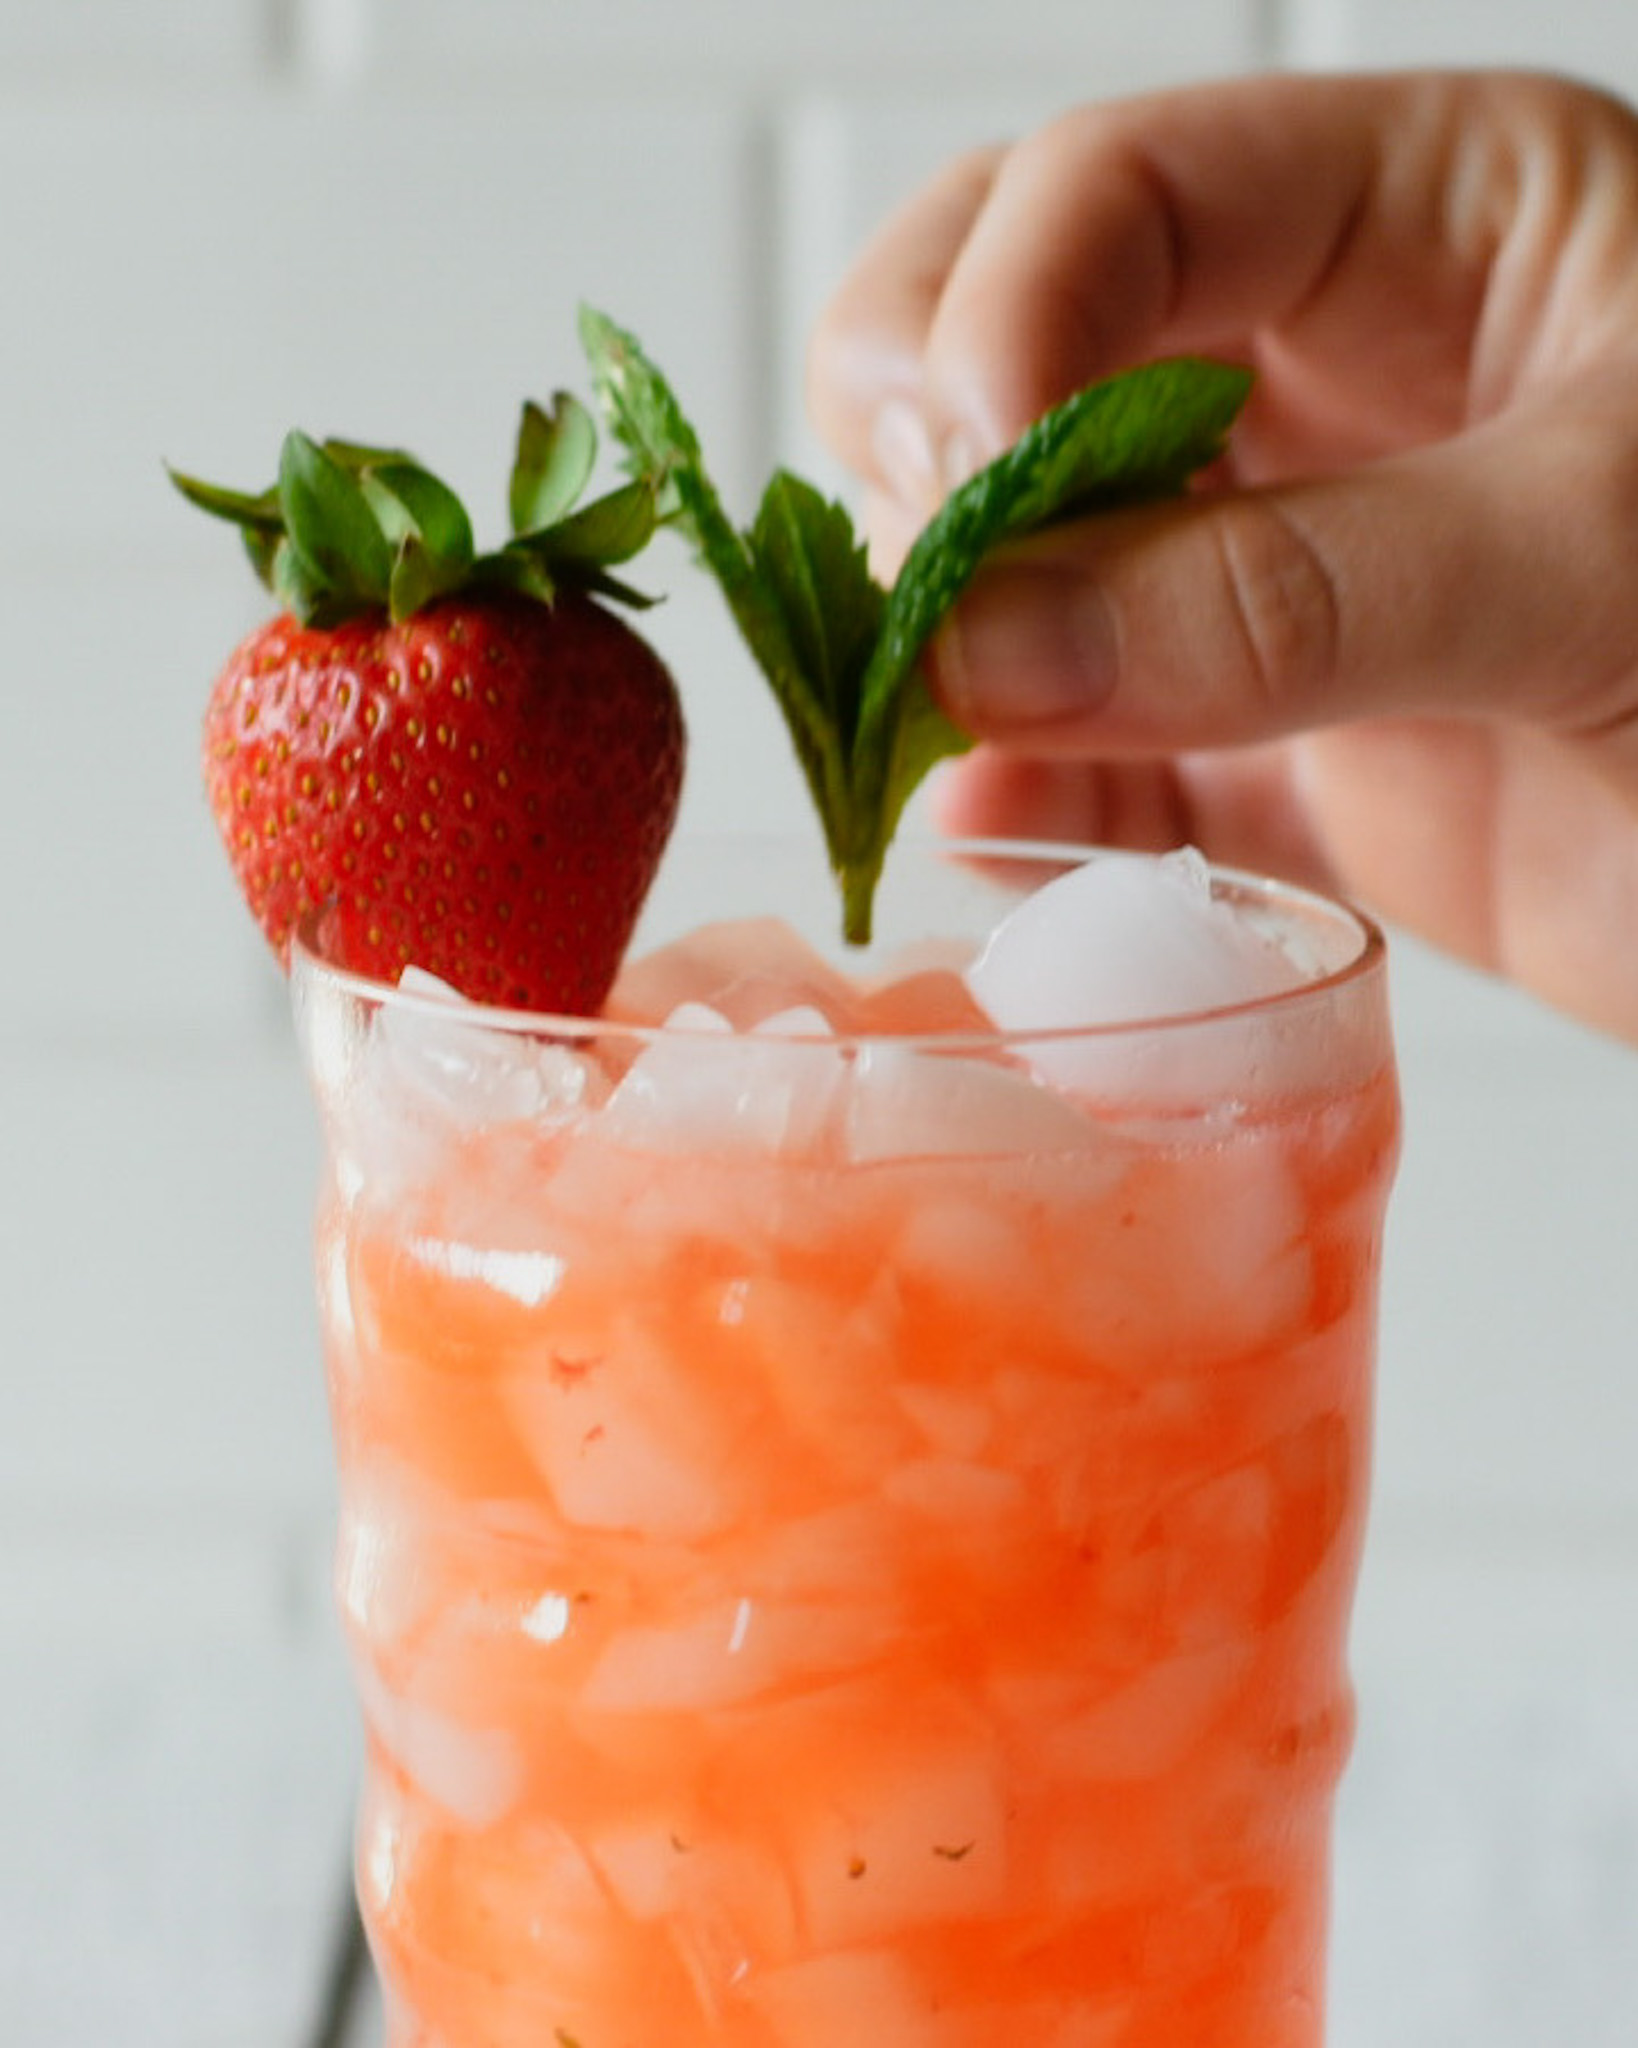 Mint being dropped into a strawberry moscow mule